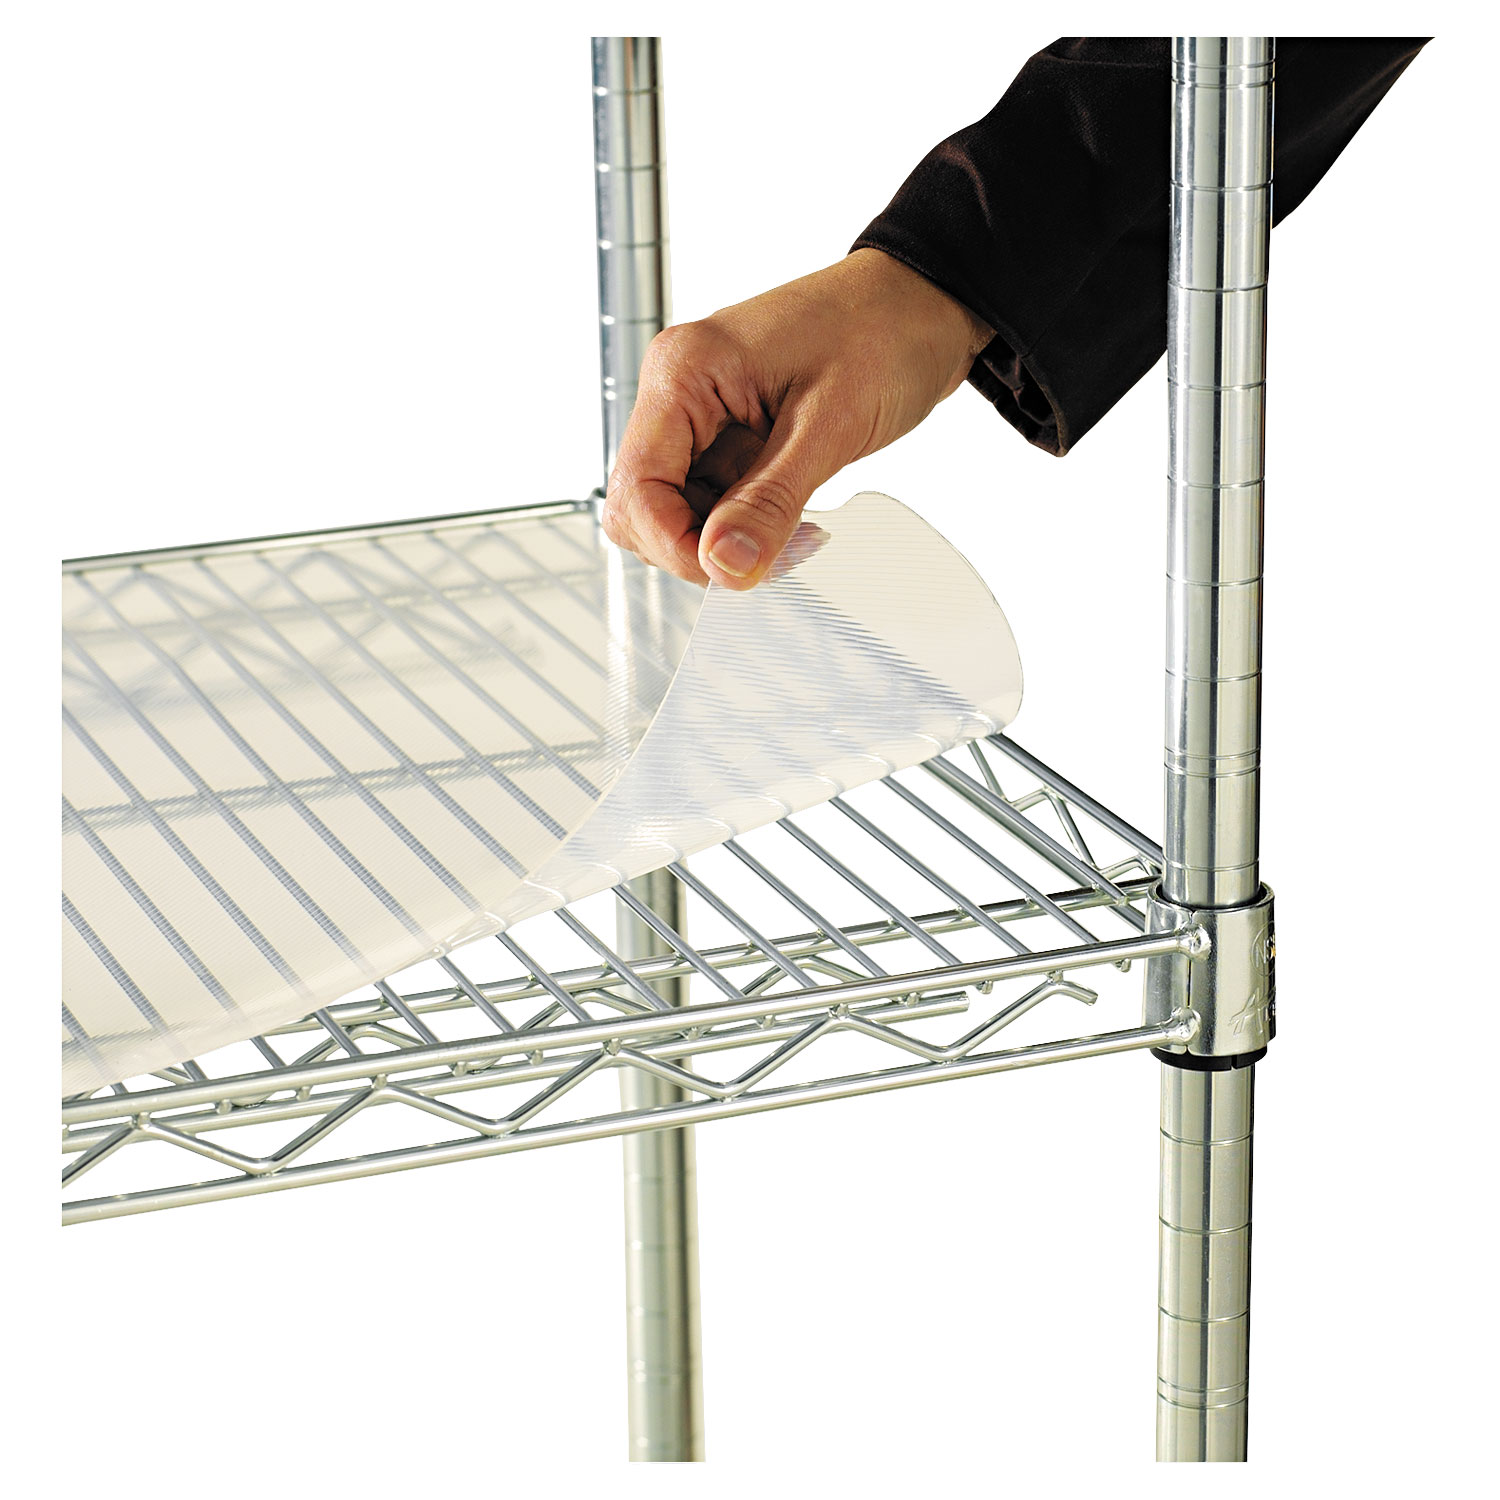  Alera ALESW59SL4824 Shelf Liners For Wire Shelving, Clear Plastic, 48w x 24d, 4/Pack (ALESW59SL4824) 